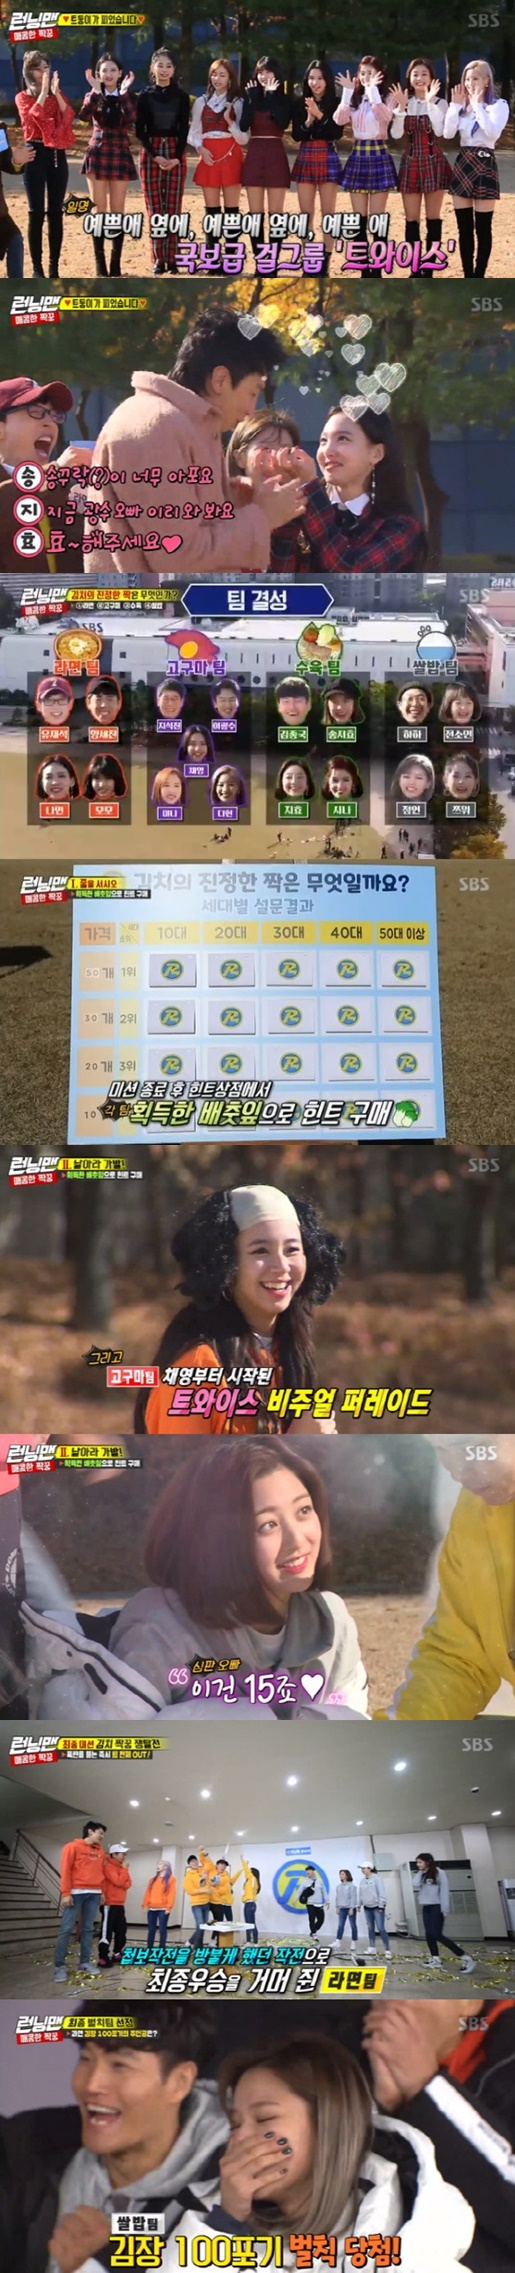 <p> SBS ‘Running Man’this unwavering 2049 target viewership in its time slot # 1.</p><p>Viewership survey Agency Nielsen Korea, according to the last 2 days of the broadcast of ‘Running Man’is 20 years old-49 years old (‘2049’) target audience 4. 5%(NCR, furniture, Part 2 viewership standard)record for the same time period, 1 ranked. Average viewership is part 1 of 5. 3%, Part 2 7. 7%(the NCR furniture viewership standards)was, per minute, with a maximum application rate of 8. Up to 8% jumped.</p><p>The kimchis true mate, find Kim most distinctive ‘spicy paired peek-a-Boo’ lace decorated in the ‘Running Man’ sister group TWICE home and by members of the acclaimed shorter. This race is a team competition with a view as if the team is Yoo Jae-Suk, Yang and more as well, Momo, I smoke, and every team in the Suk Jin, Lee Kwang-soo, Chae, Mina, Implementation, Training, Team Kim Jong Kook, Song JI Hyo,, Hyo, Rice team in that one, small, square, Richardson sub divided into.</p><p>Each team has a ‘line’ through the game fierce confrontation unfolded, the team, the academic team, and each team, each 1 win by handing out the hints acquired, and Round 2 of the ‘fly! The wig-switching in the potato team and if the team is 1 for, 2 for to or once the hint is acquired.</p><p>The last final round that the menu is attached to the name tag off of the menu when you exchange, while a bomb attached to the name tags off team the power is out, and the menu until the opponent beyond the ‘Star race’began. Ago min is Lee Kwang-soos name tag off, but Lee Kwang-soo is a bomb, this Rice team is the power being out face. Water and water our father, and our exchange in La, teams info to start up, expand, and ‘kimchis true even’exclaim the headquarters seat and headed towards, training, team support available to the team or the name of the tag off as when I smoke “then”and cry victory.</p><p>Meanwhile, Kim 100 give Driving Cycle penalty for the uncle in the game Rice team of the square ‘shit son’, born and penalties in winning was and this scene is up to 8. 8%jump in the ‘best 1 minute’[photo] ‘Running Man’ broadcast screen capture</p><p> ‘Running Man’ broadcast screen capture</p>